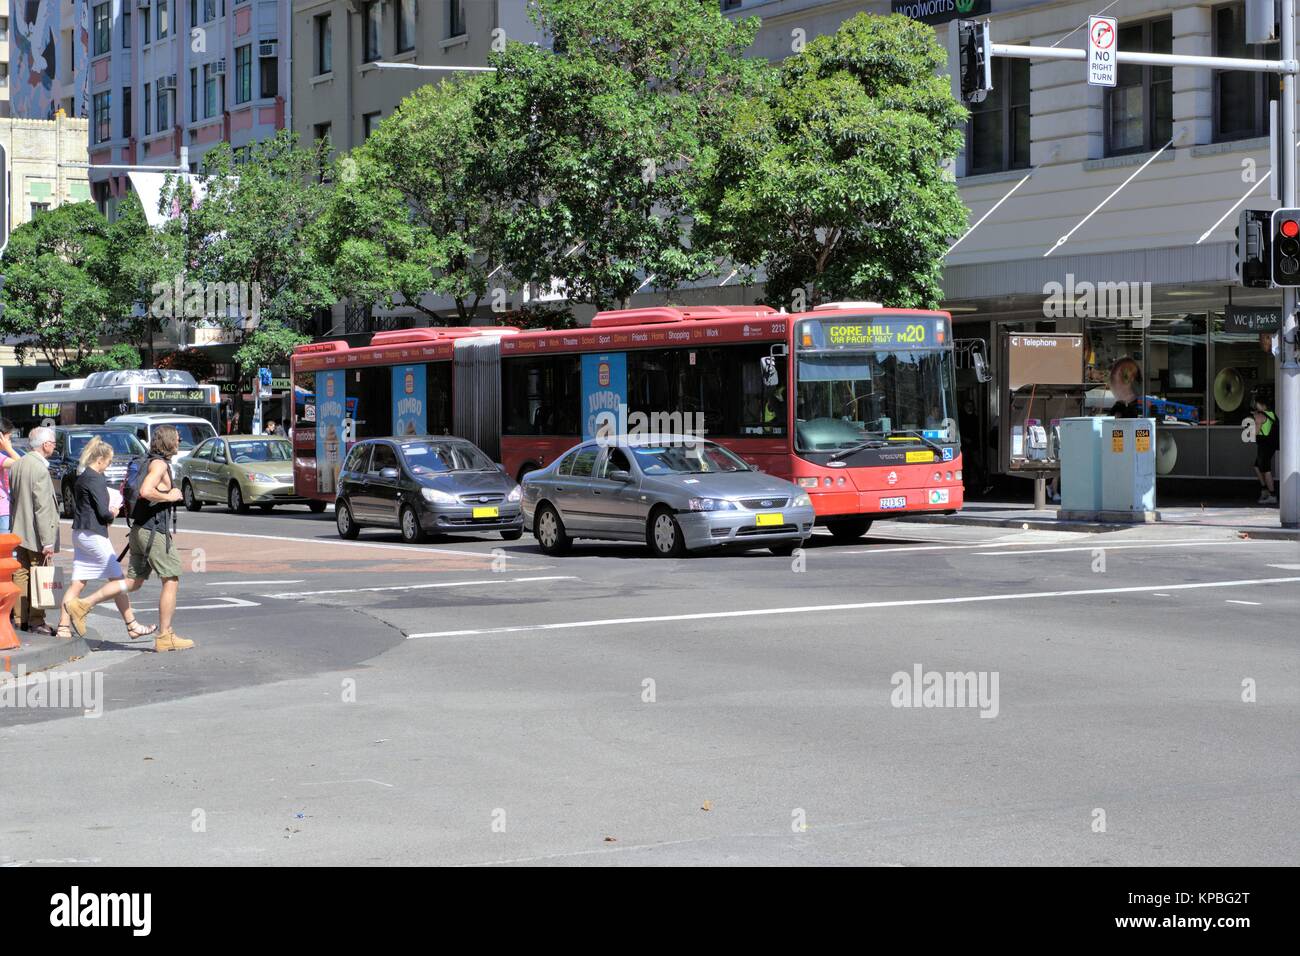 Sydney street day time. Traffic intersection in Sydney Australia. Pedestrians crossing street at a traffic crossing while vehicles wait. Stock Photo